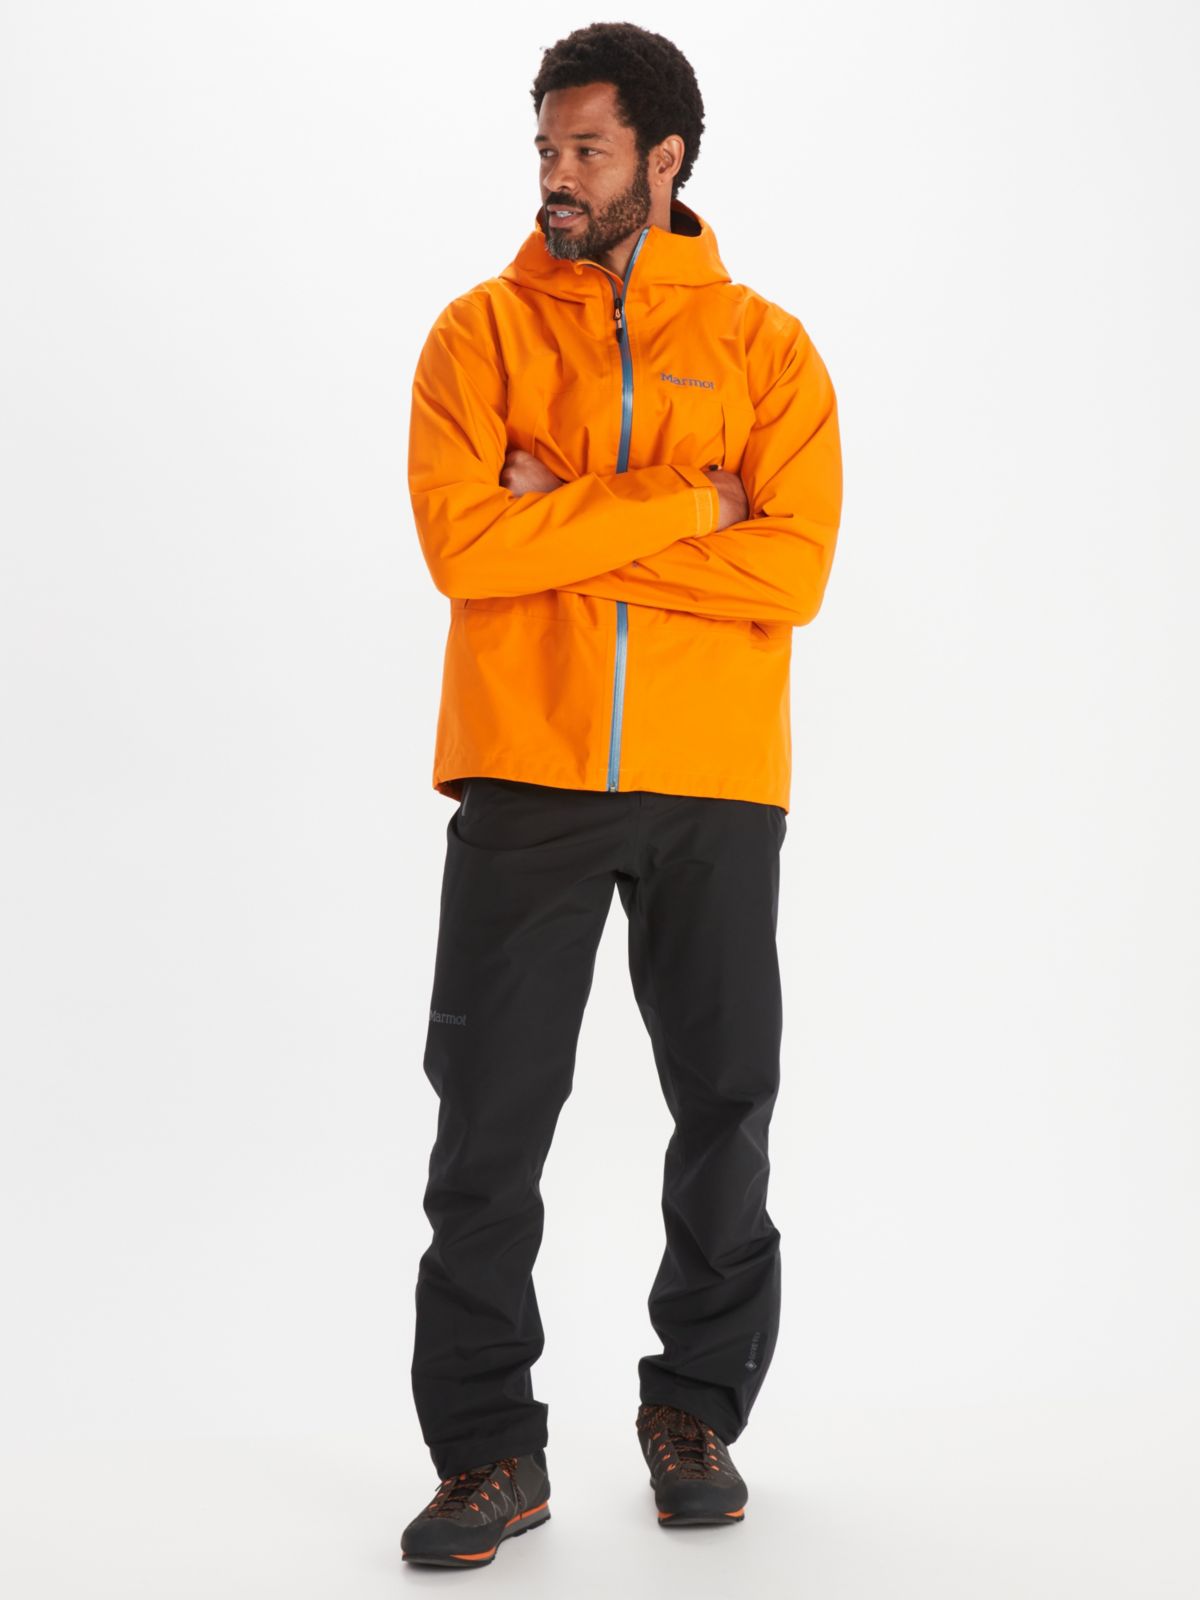 male model wearing assorted outdoor clothing and apparel